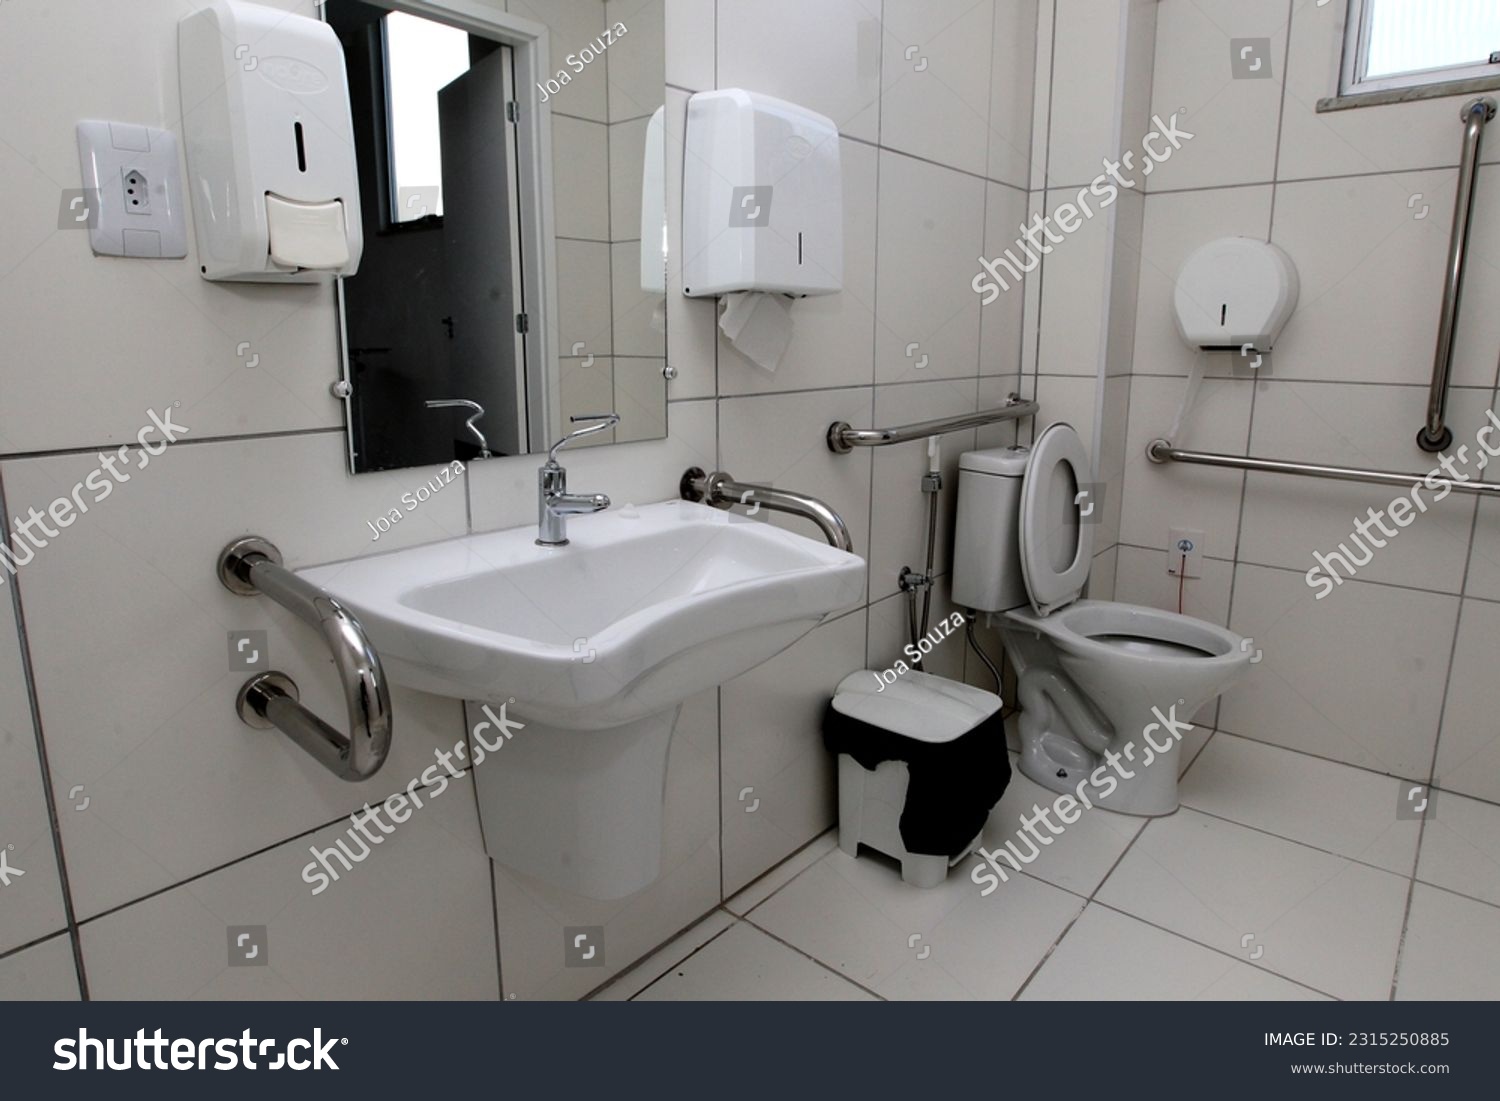 itaberaba, bahia, brazil - june 3, 2023: bathroom with handrail for accessibility in a public hospital in the city of Itaberaba. #2315250885